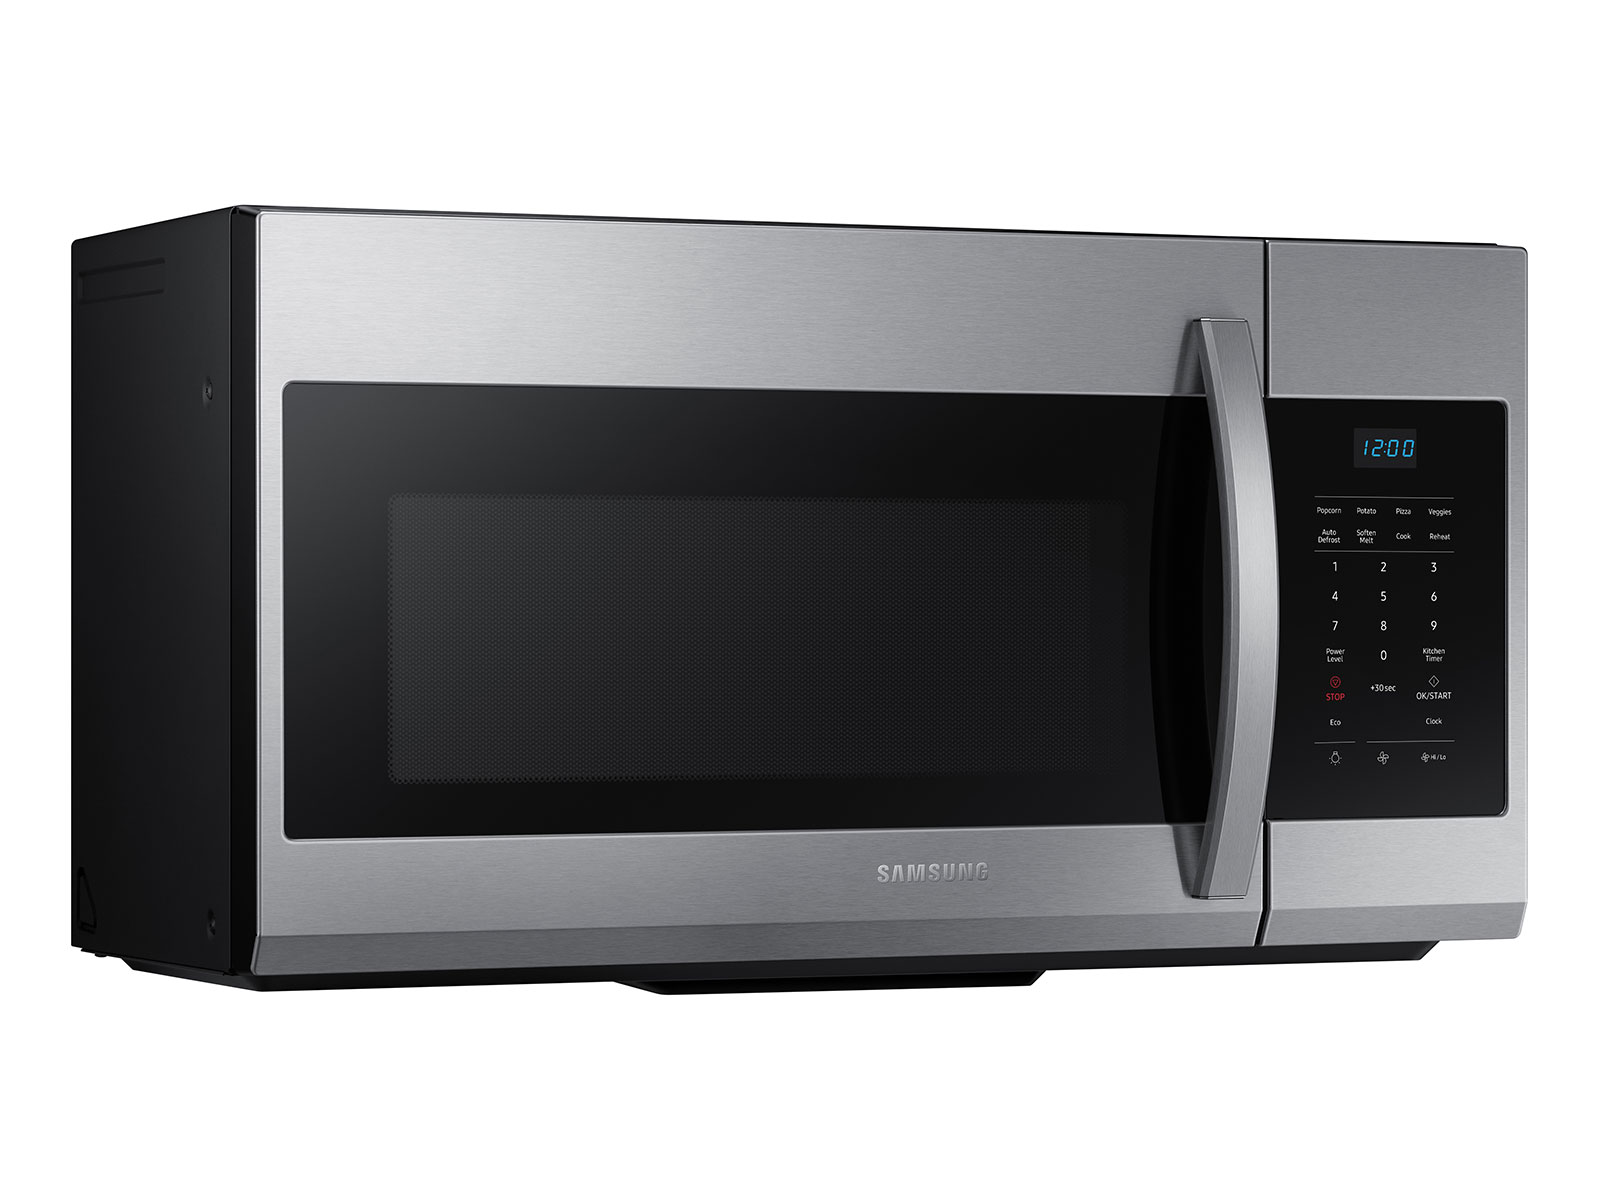 https://image-us.samsung.com/SamsungUS/home/home-appliances/microwaves/over-the-range/pdp/-me17r7021e/silver/PDP-GALLERY-R7021-007-Silver-1600x1200.jpg?$product-details-jpg$